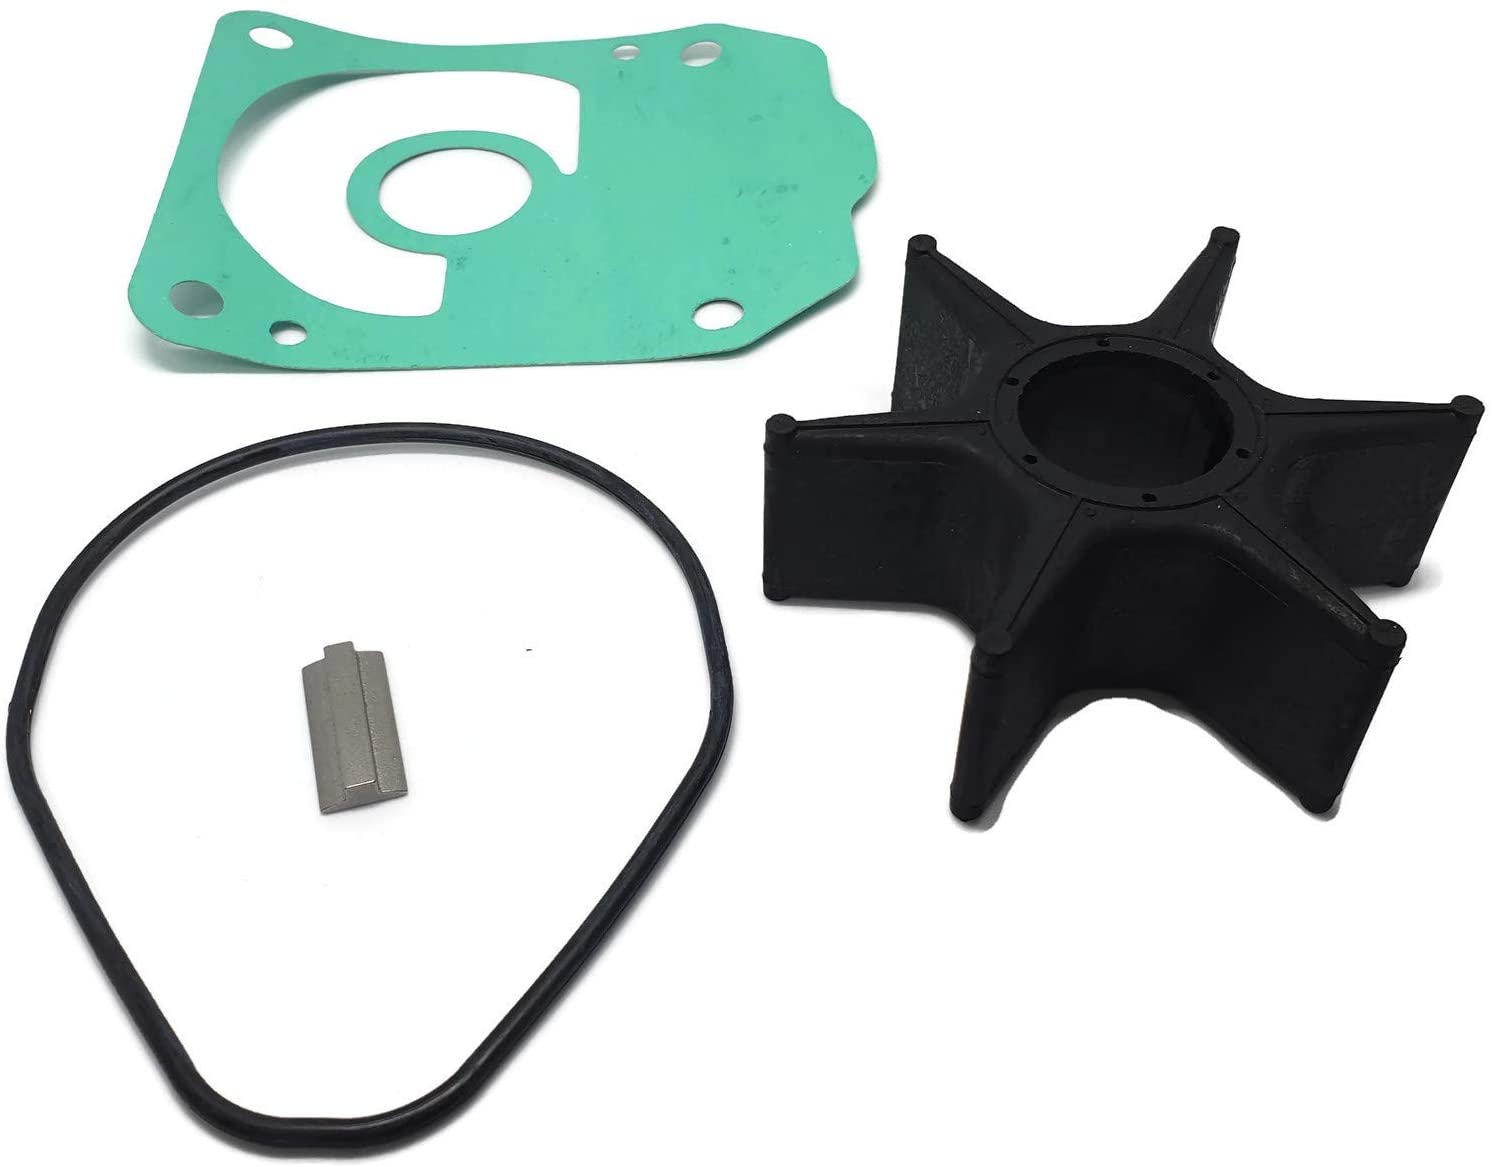 Water Pump Impeller Kit for Honda BF175A/BF200A/BF225A 06192-ZY3-000 Outboard